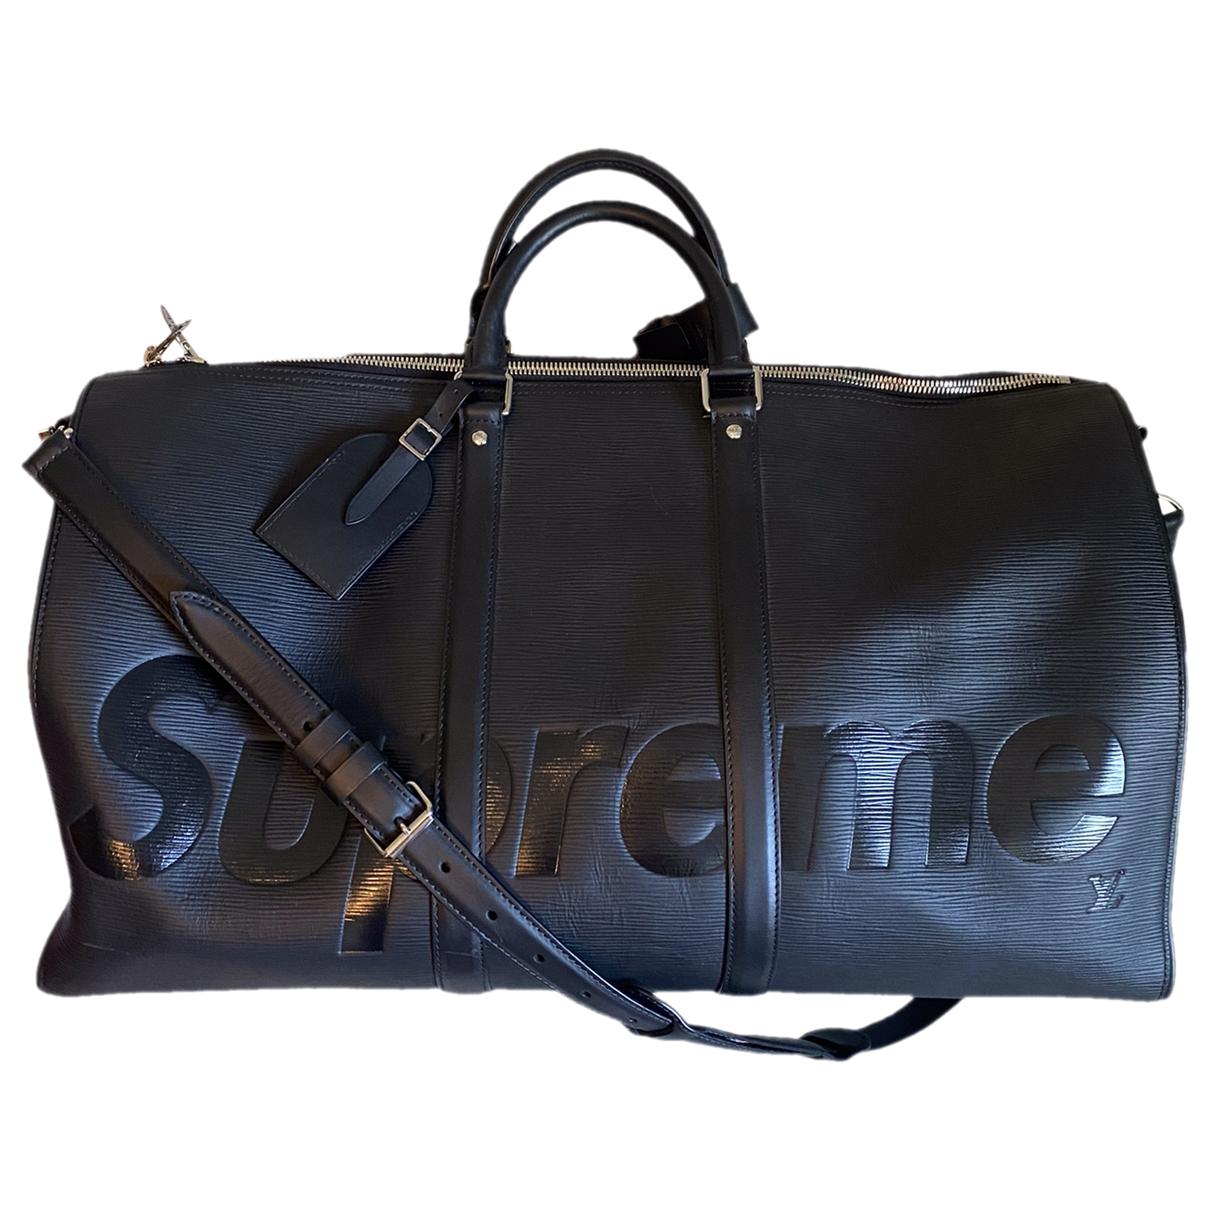 ≡ LOUIS VUITTON x SUPREME Bag for men - Buy or Sell your LV bags